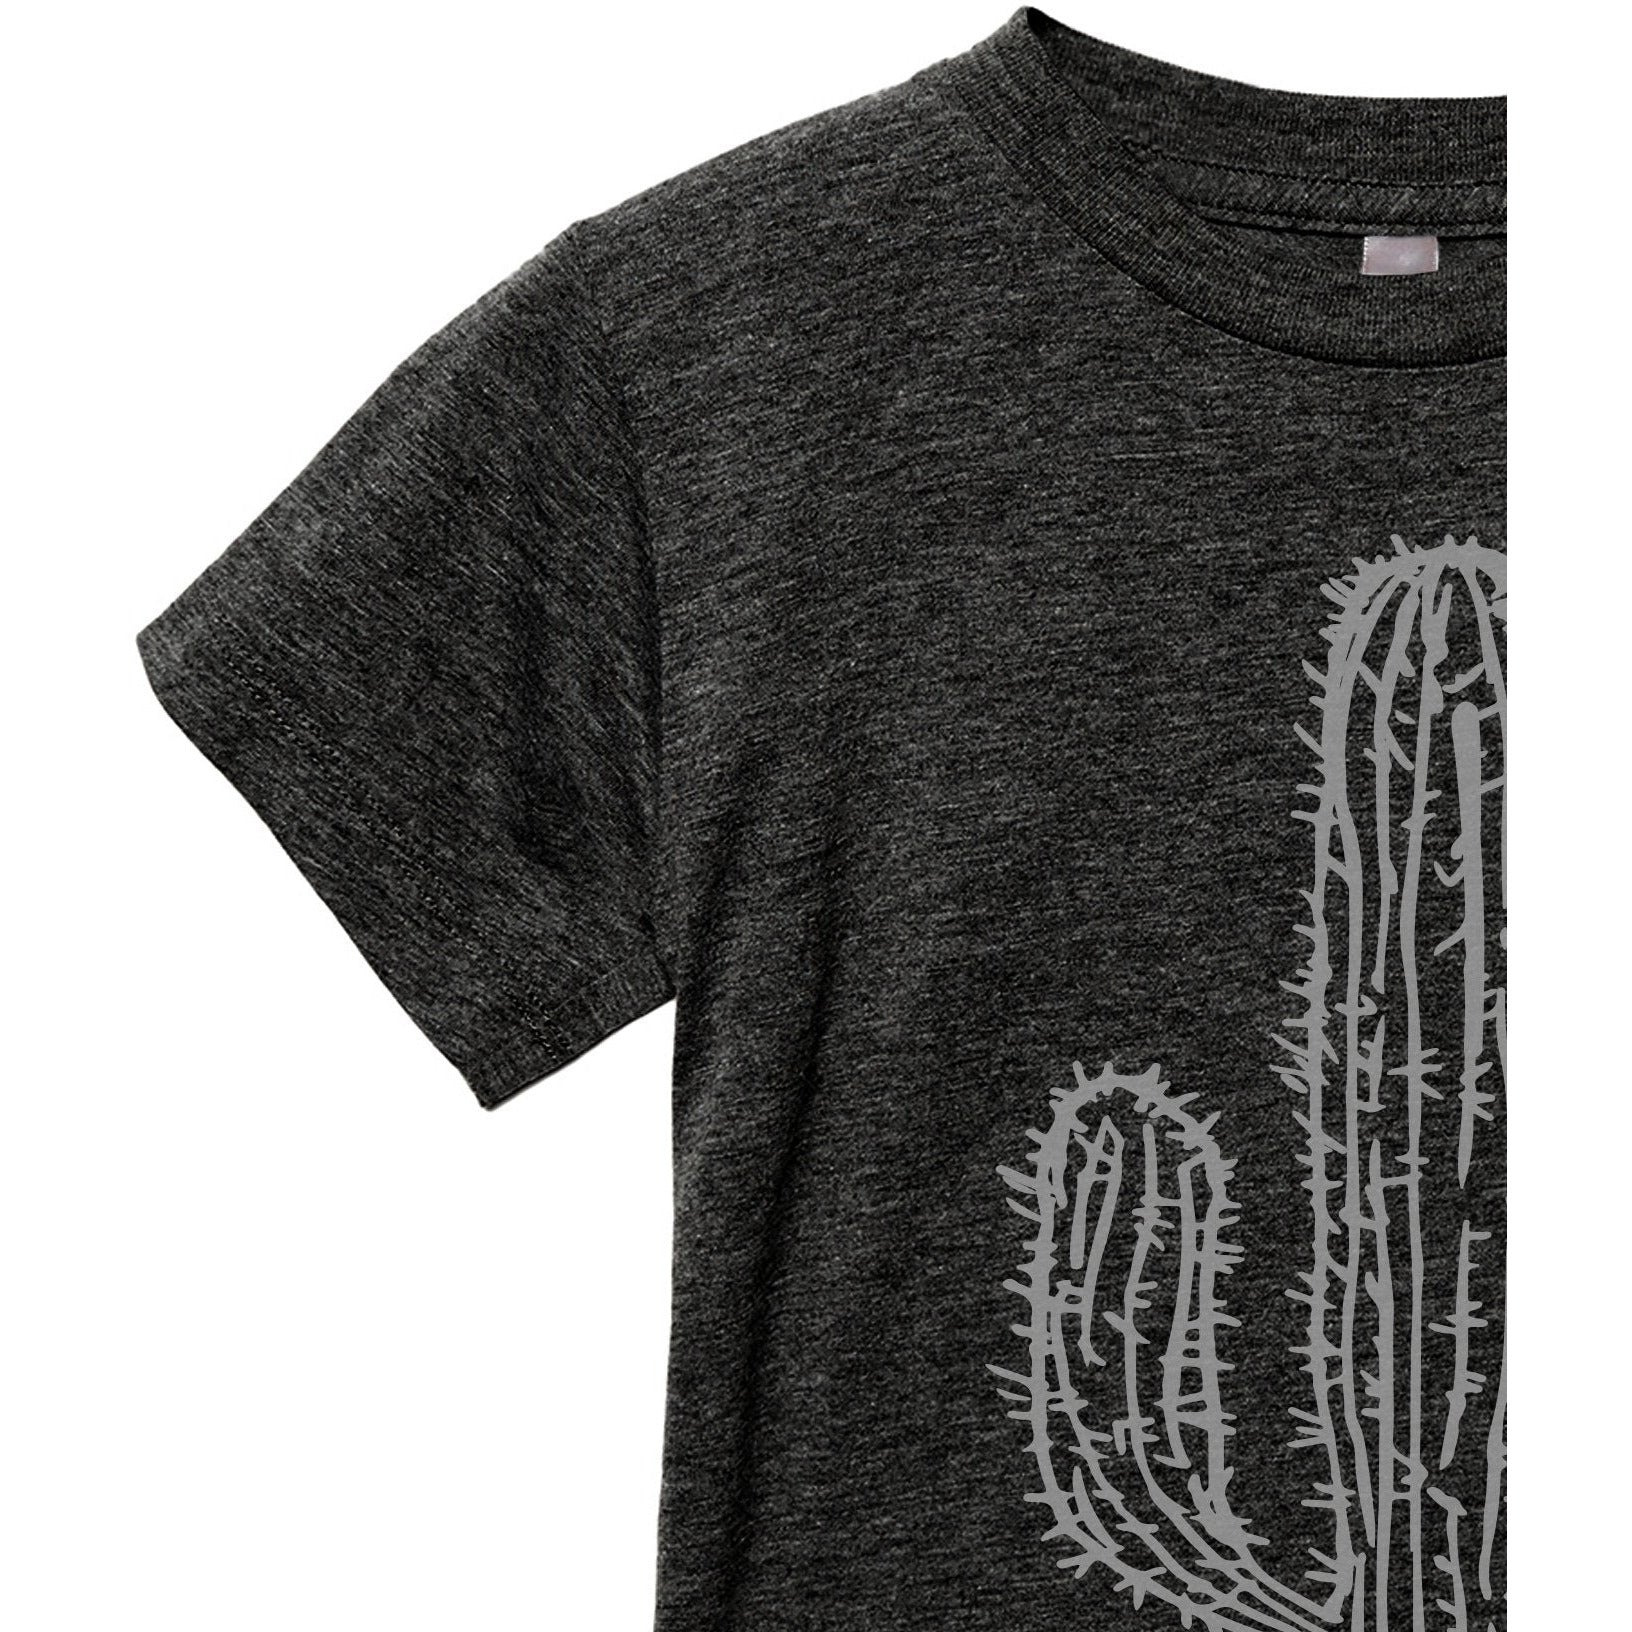 Desert Cactus Toddler's Go-To Crewneck Tee Charcoal Zoom Details A